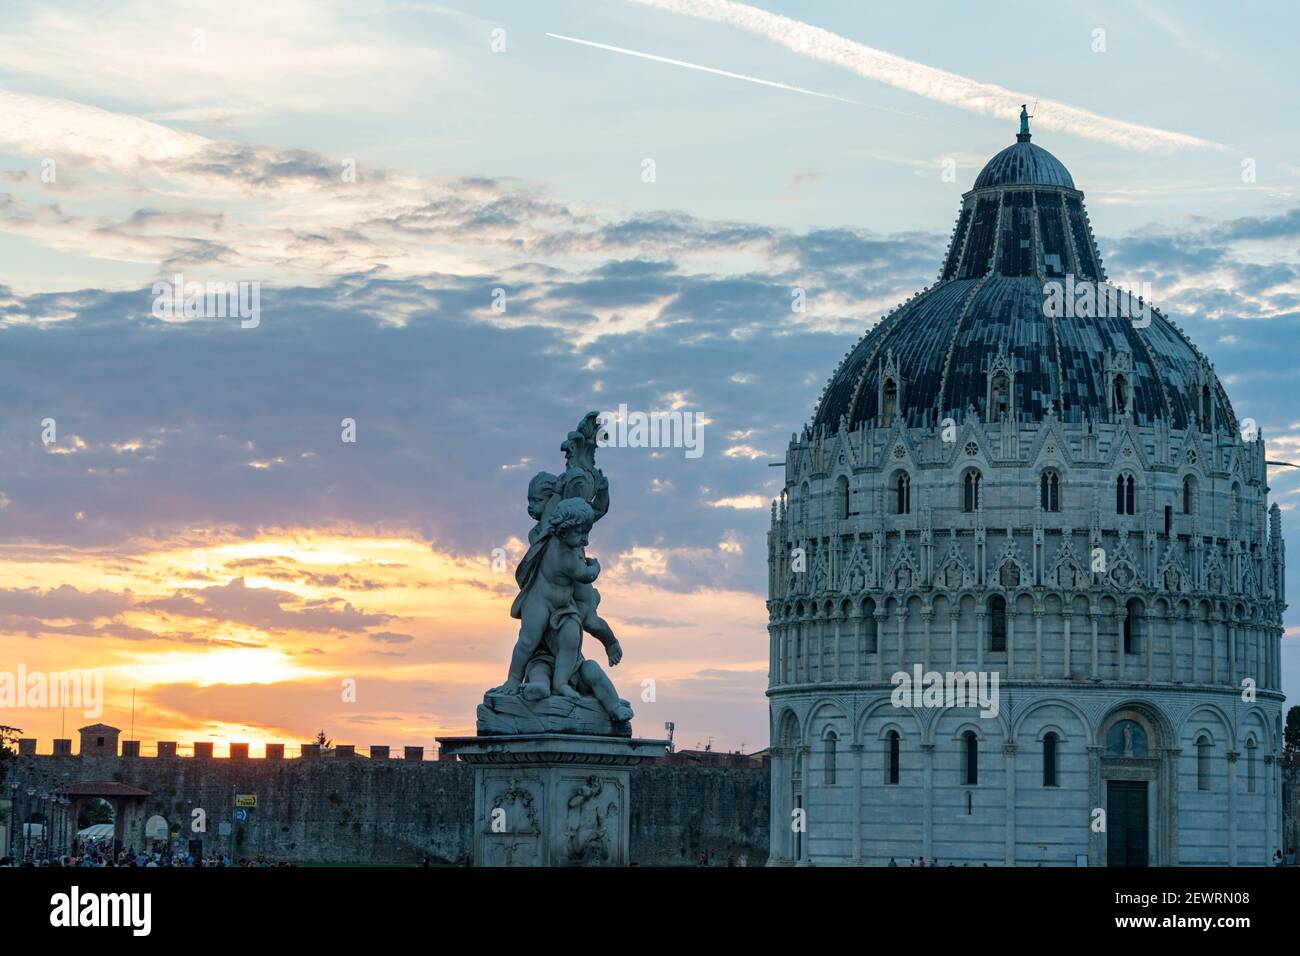 Statues and dome of the Baptistery at sunset, Piazza dei Miracoli (Piazza del Duomo), UNESCO World Heritage Site, Pisa, Tuscany, Italy, Europe Stock Photo